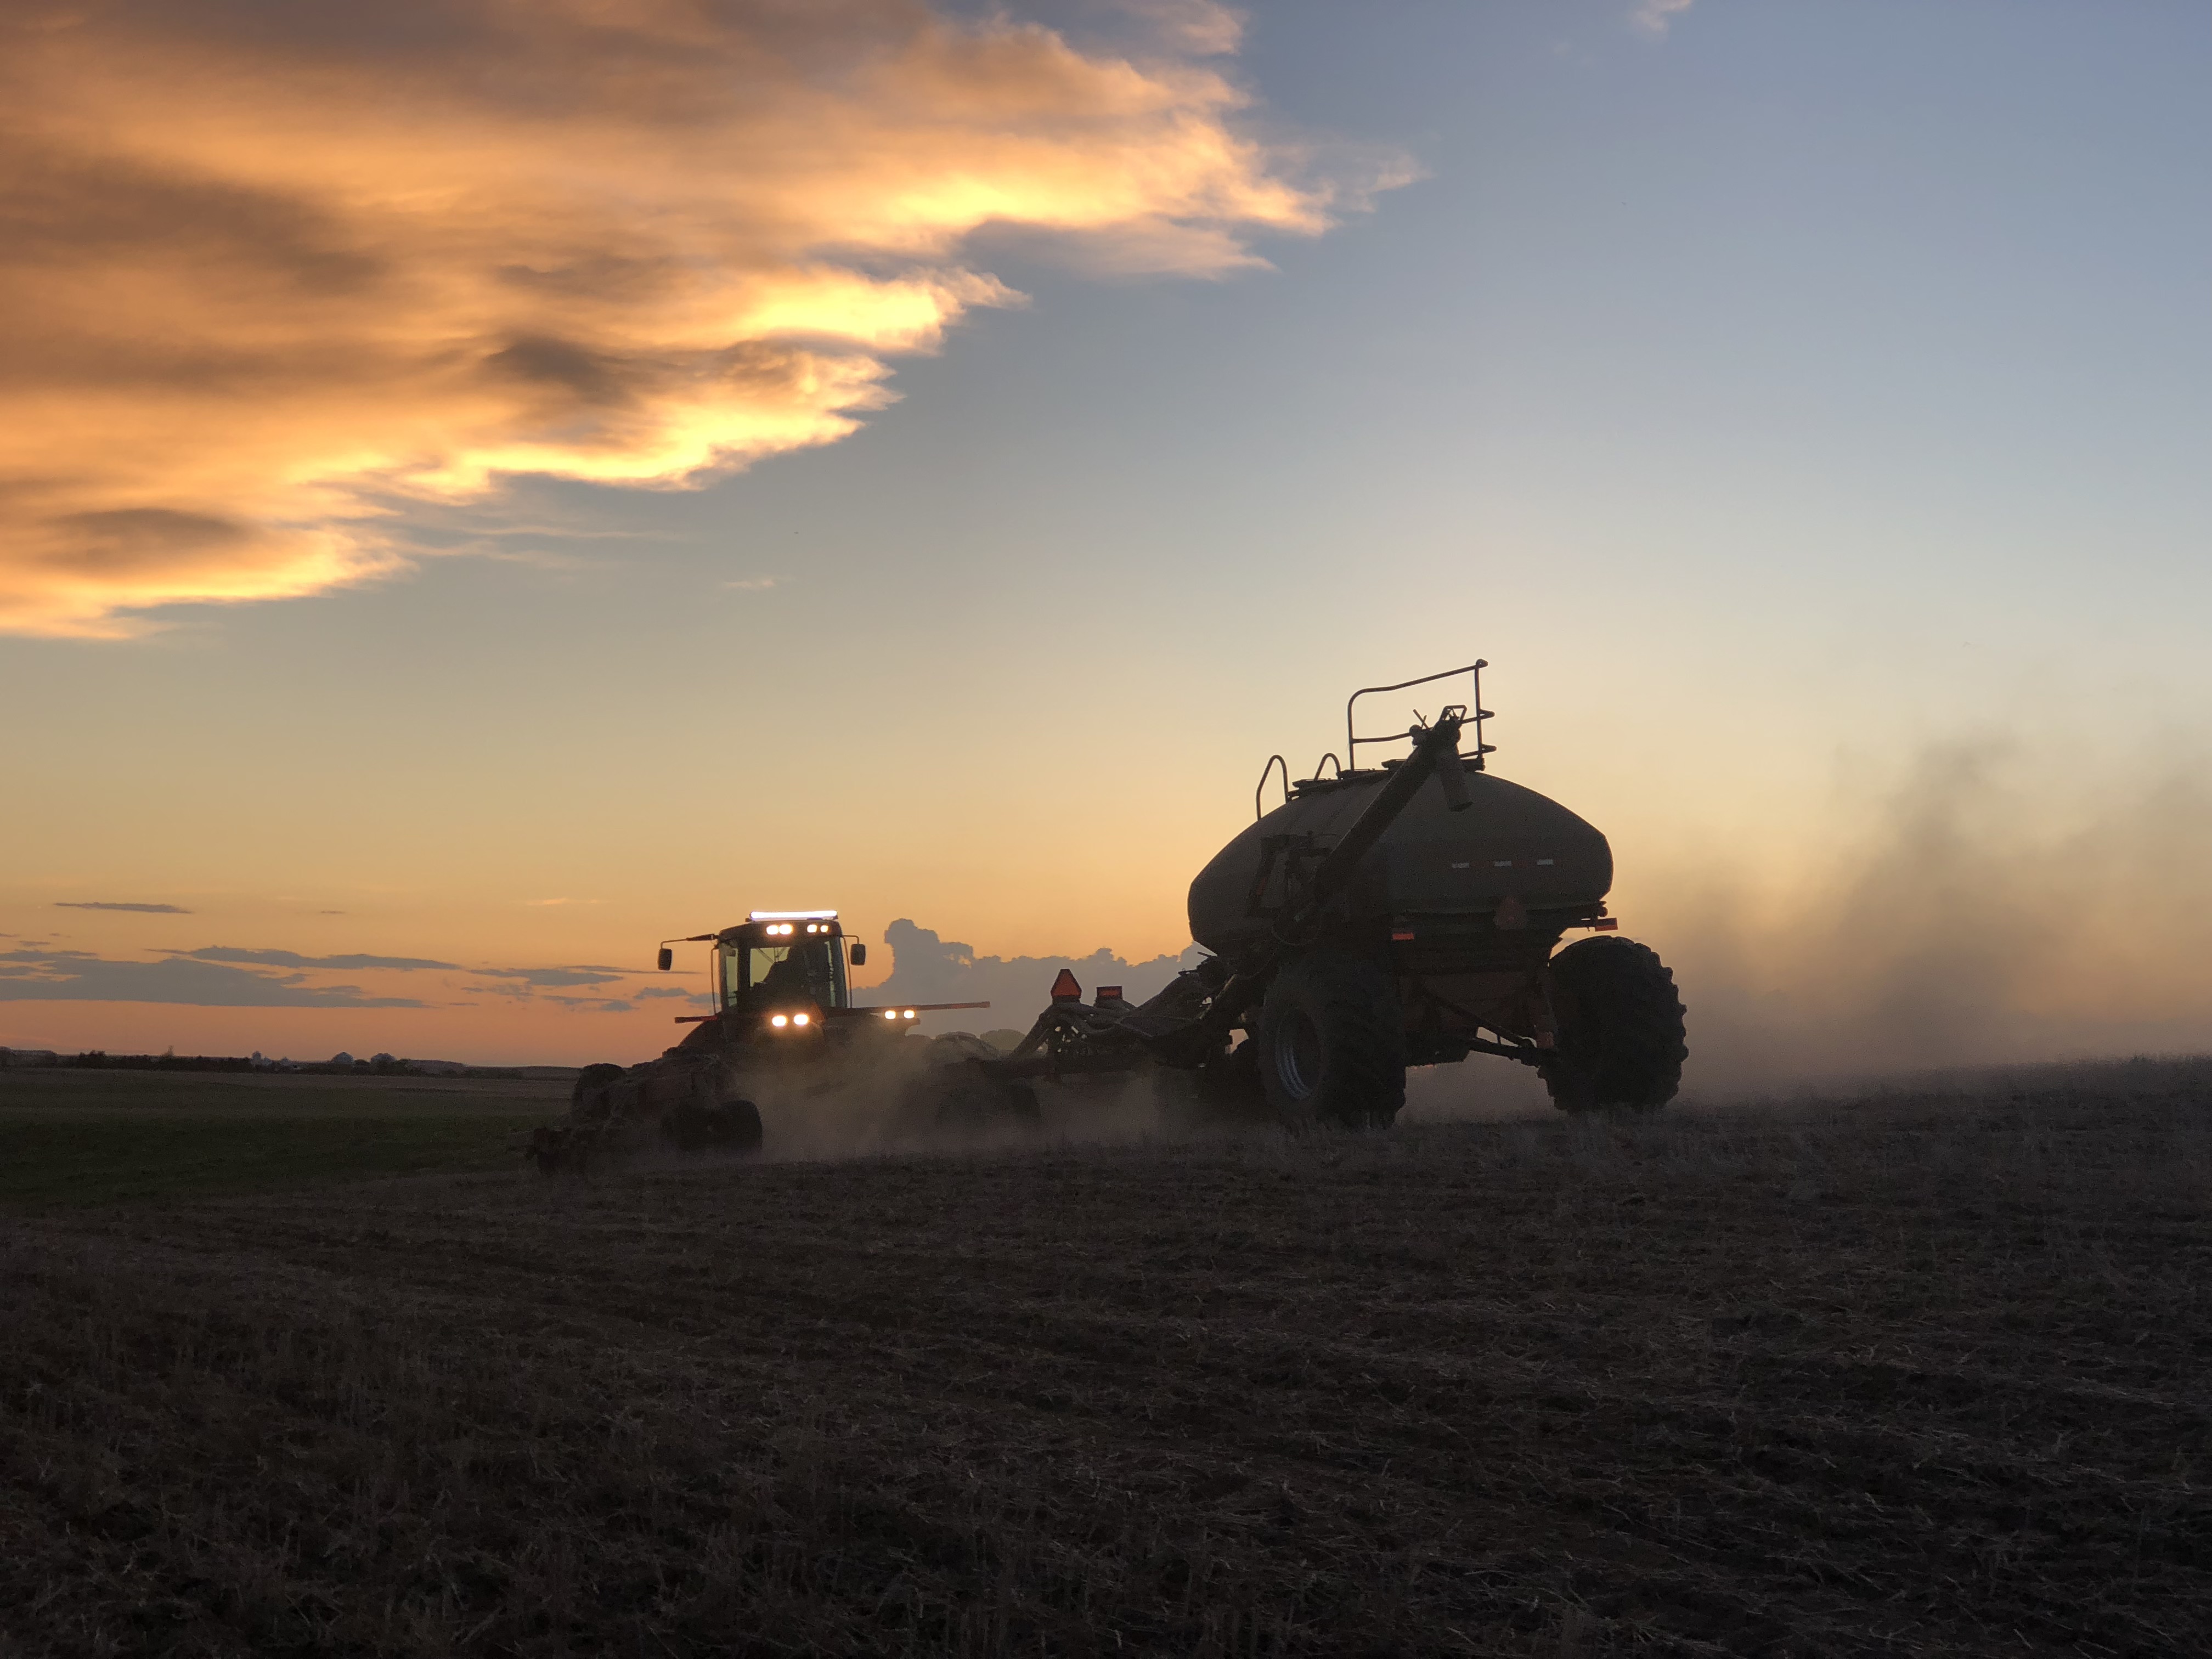 Mike Schulte, Oklahoma Wheat Commission, Says Farmers Are Making Rapid Progress Planting a Crop They Hope Consumers Will Continue to Show a Strong Demand  For